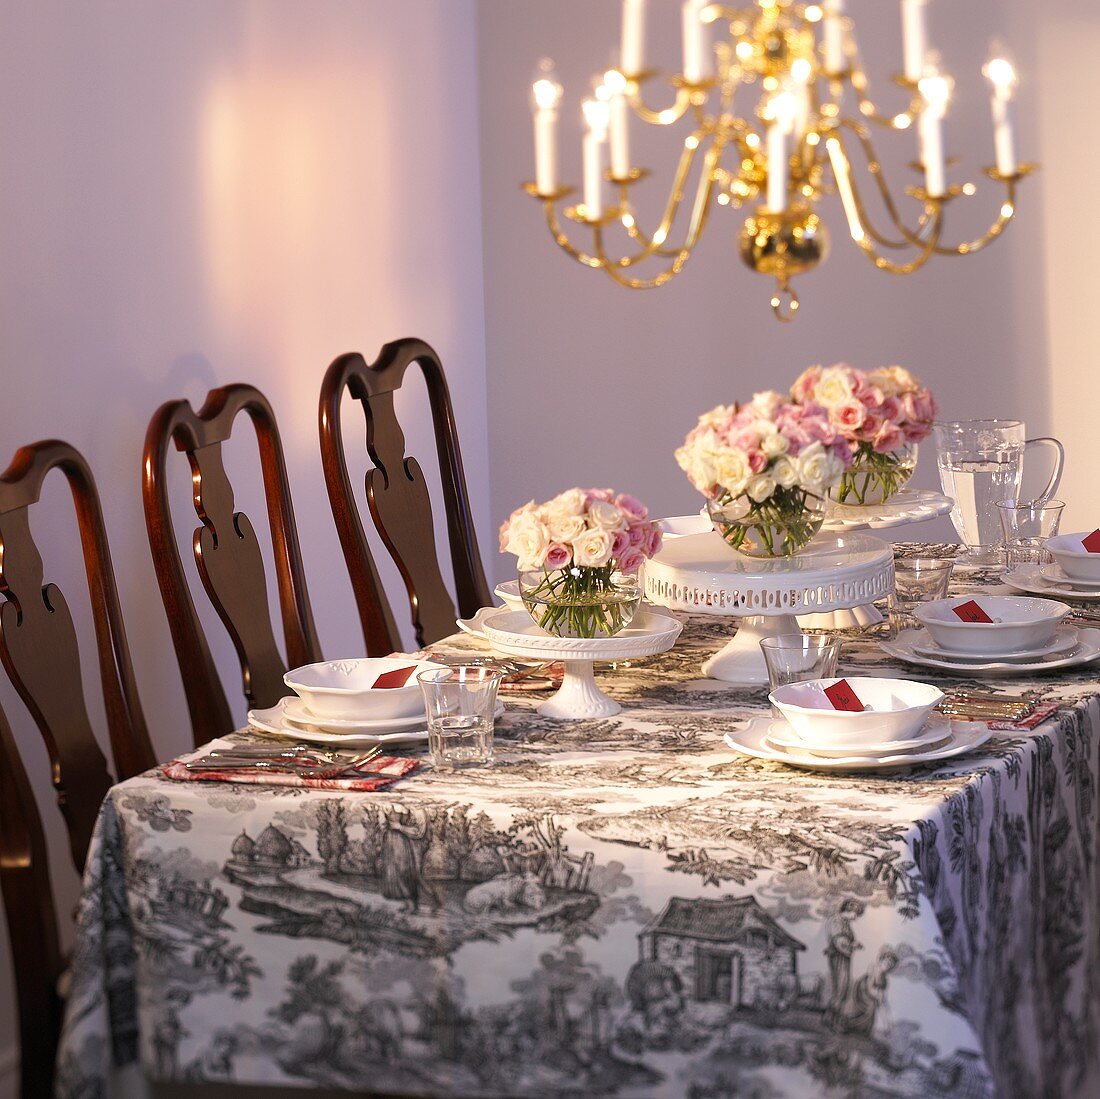 Festive table with white tableware and roses